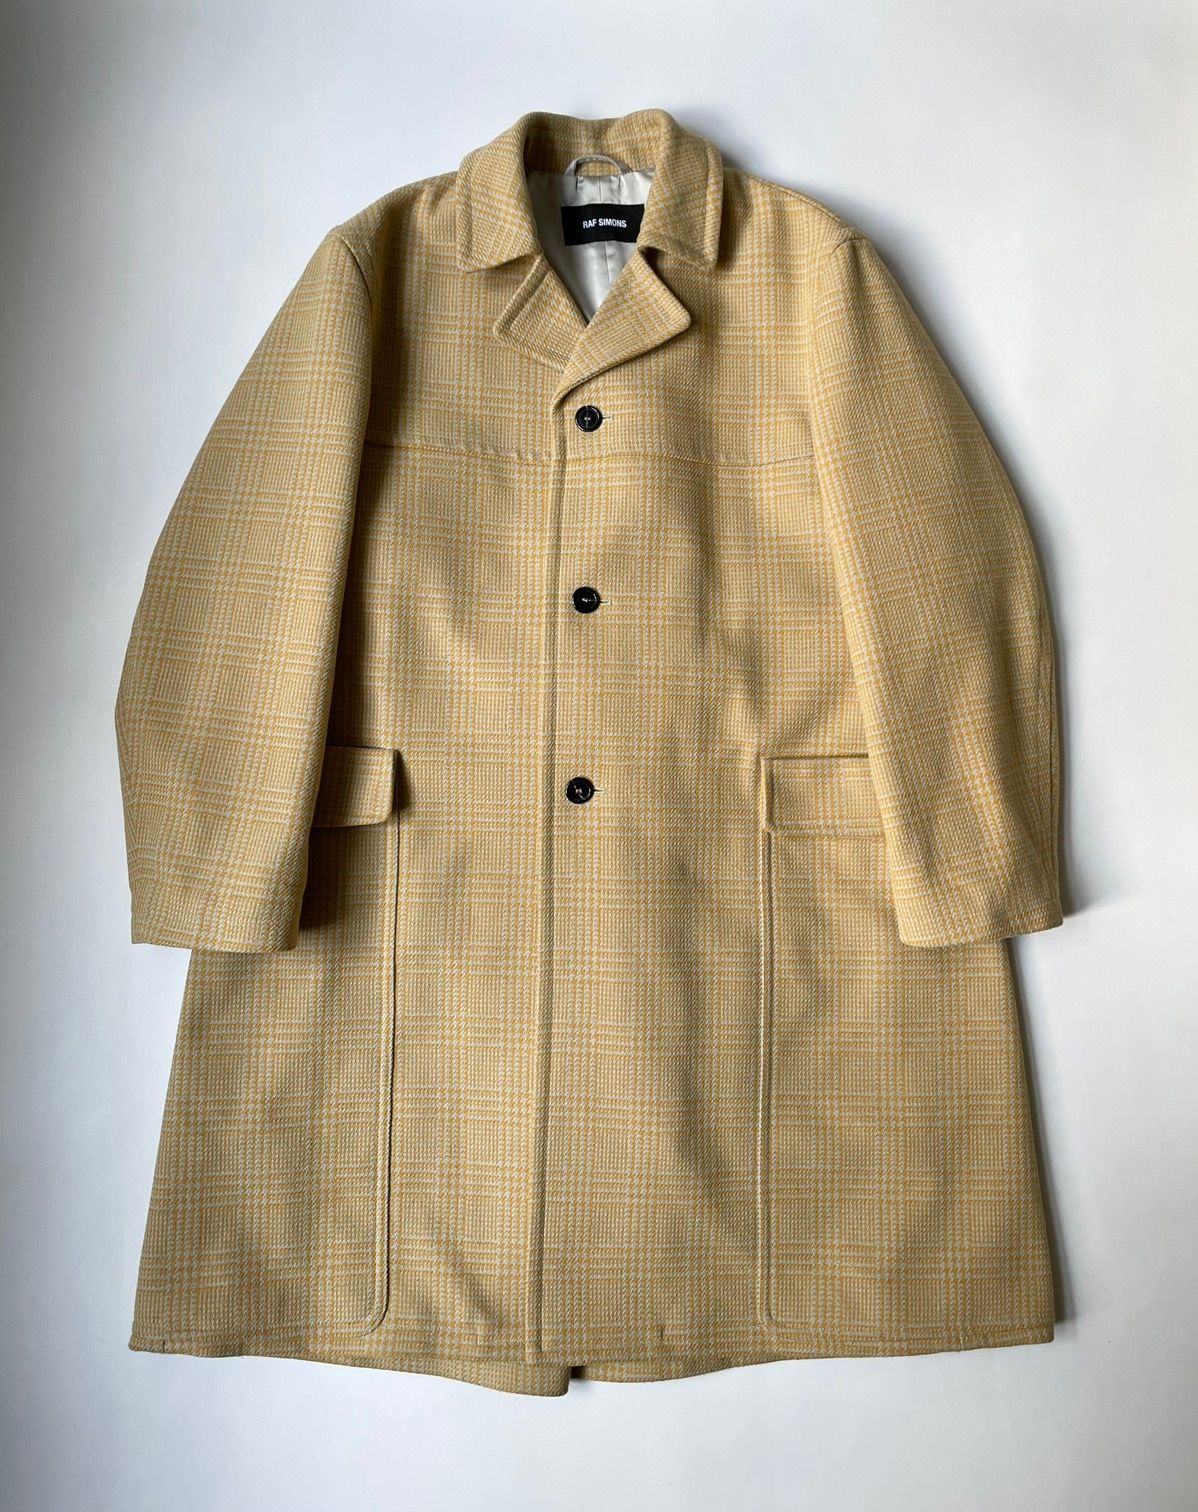 Raf Simons A/W 18 'Spacer' Check Wool Overcoat | Grailed